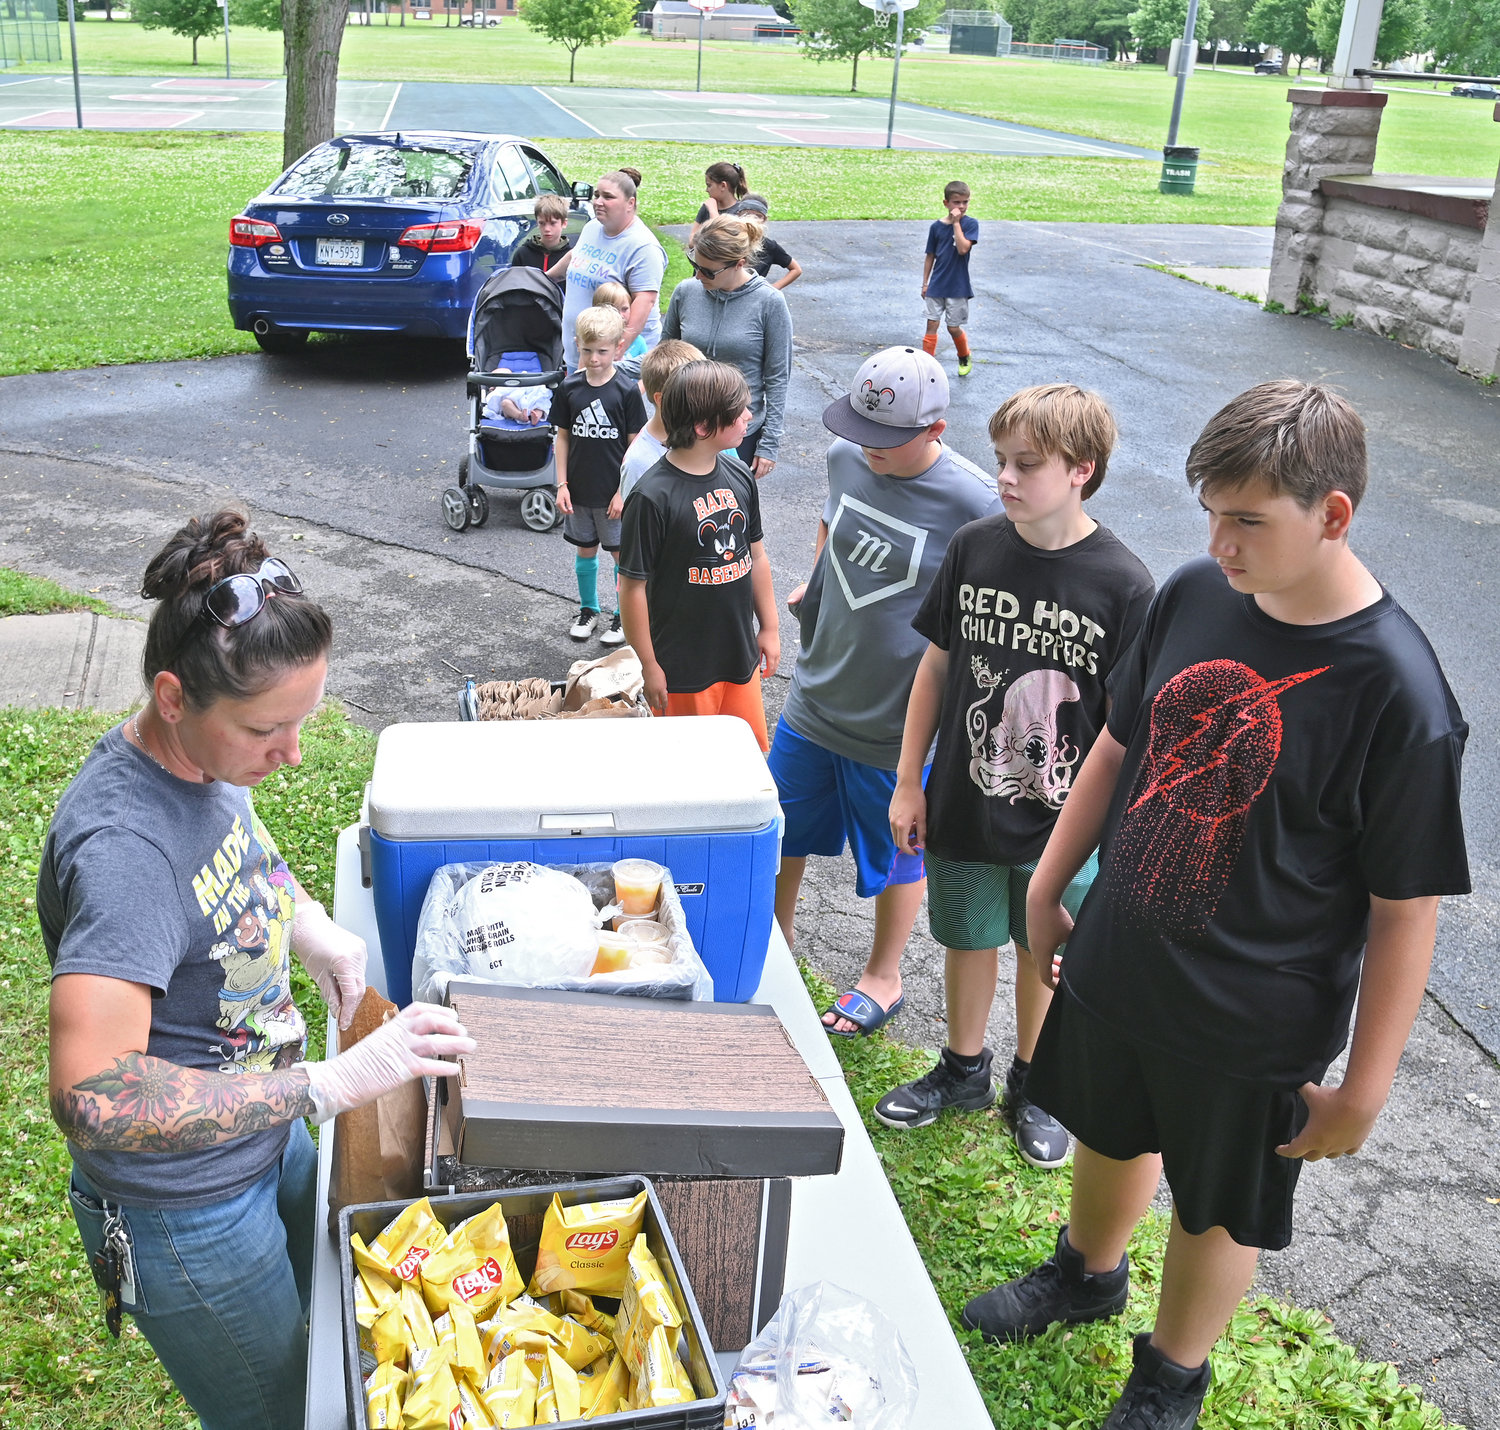 Rome City School District employee Hillary Young serves free sandwiches and sides to children lined up at Franklyn’s Field on North James Street as part of the district’s 2022 Summer Food Service program. Similar programs elsewhere in the county, including Utica, help ensure that local youths receive nutritious lunches even when school’s not in session.